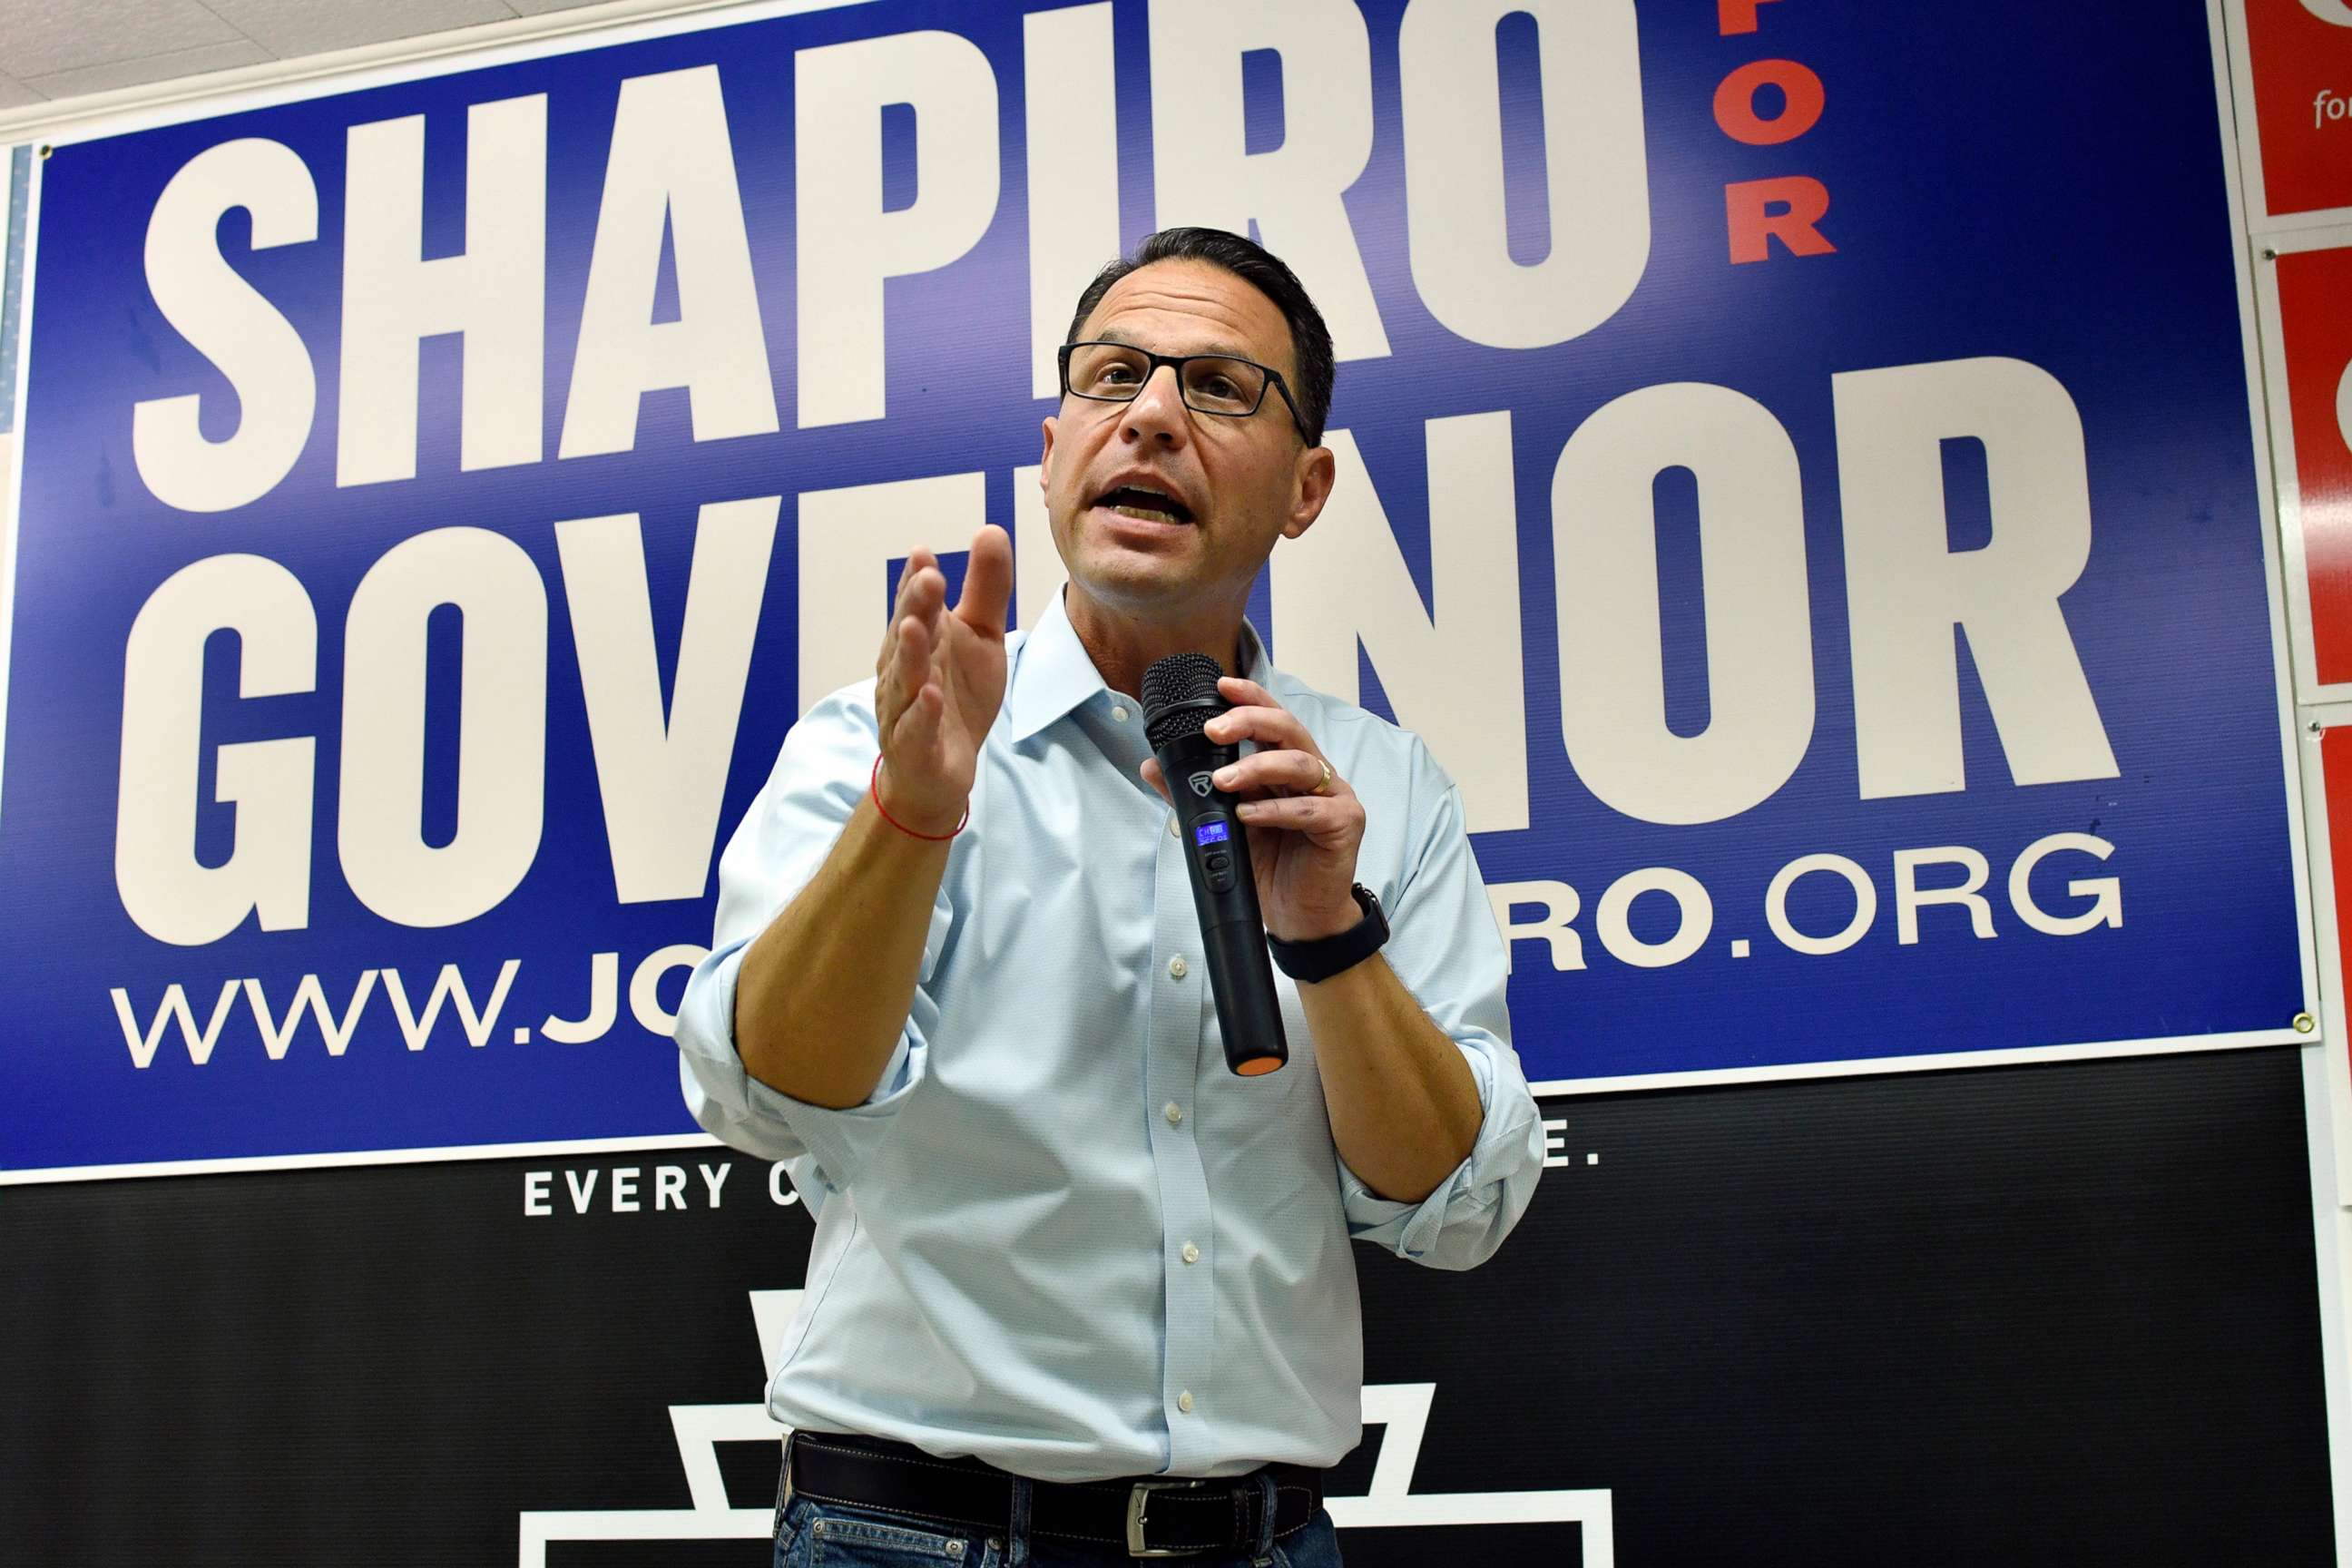 PHOTO: Josh Shapiro, Pennsylvania's Democratic nominee for governor, speaks to the crowd during a campaign event in Gettysburg, Pa., Sept. 17, 2022.